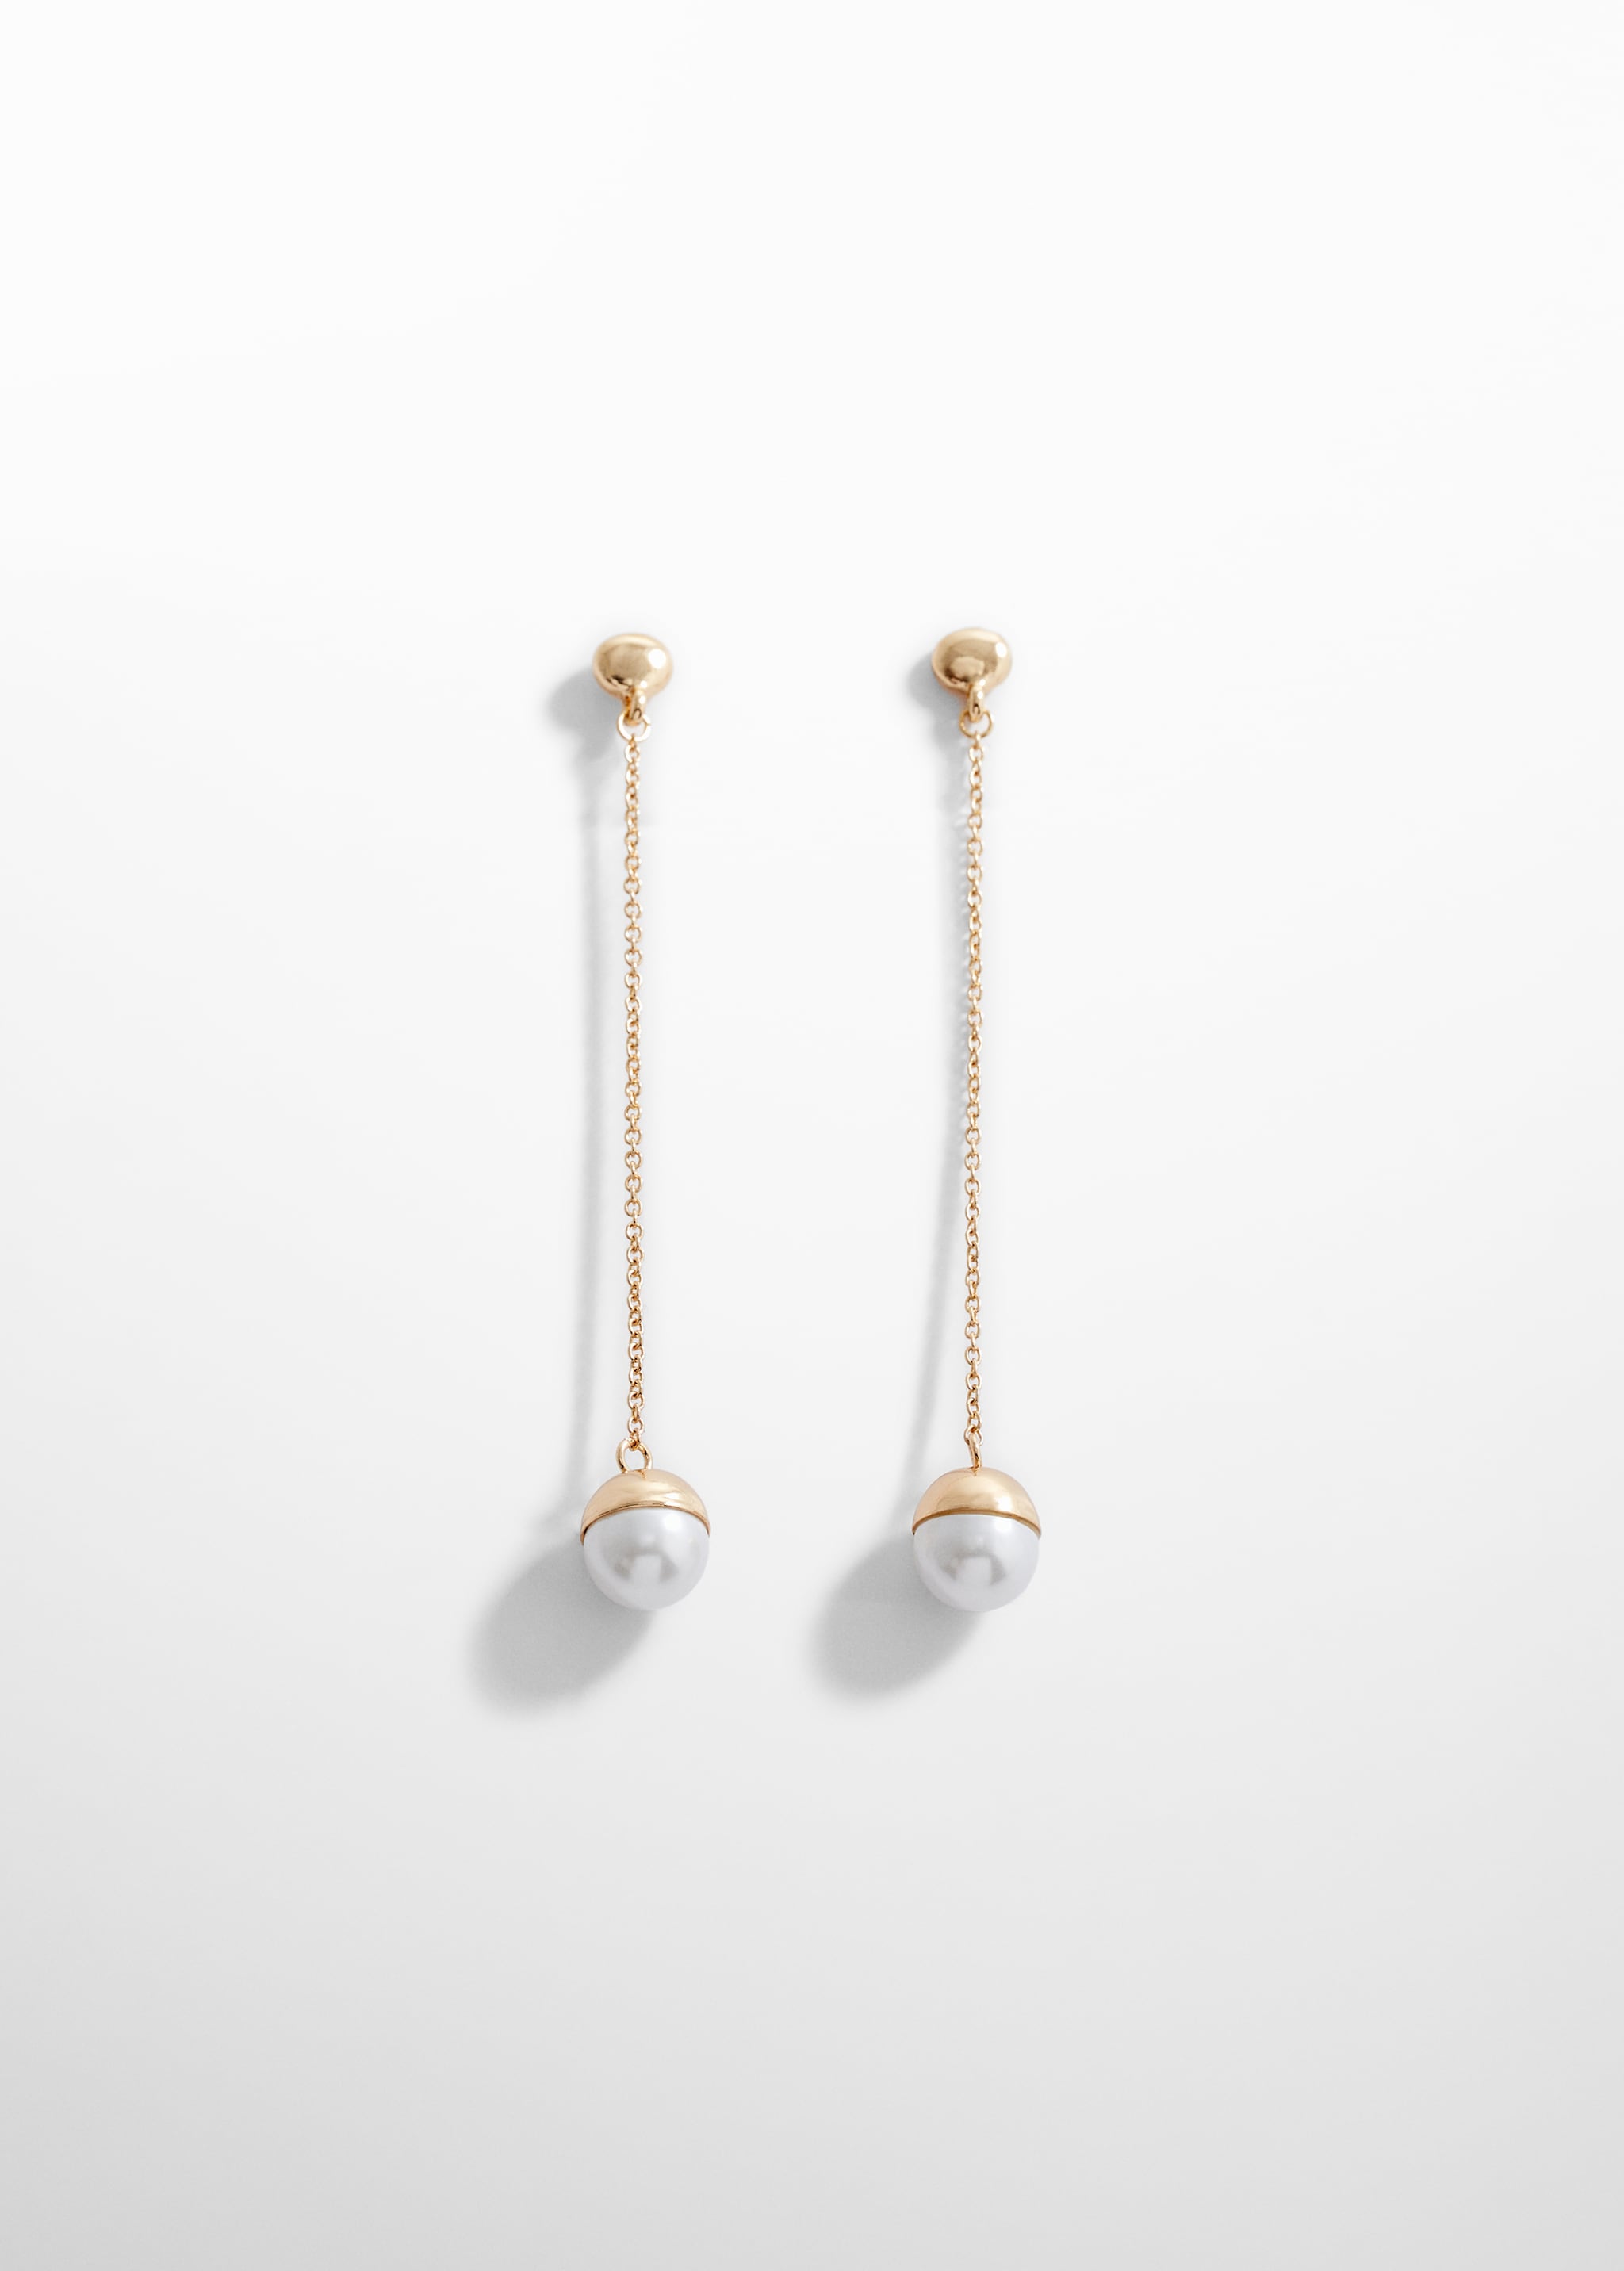 Pearl pendant earrings - Article without model